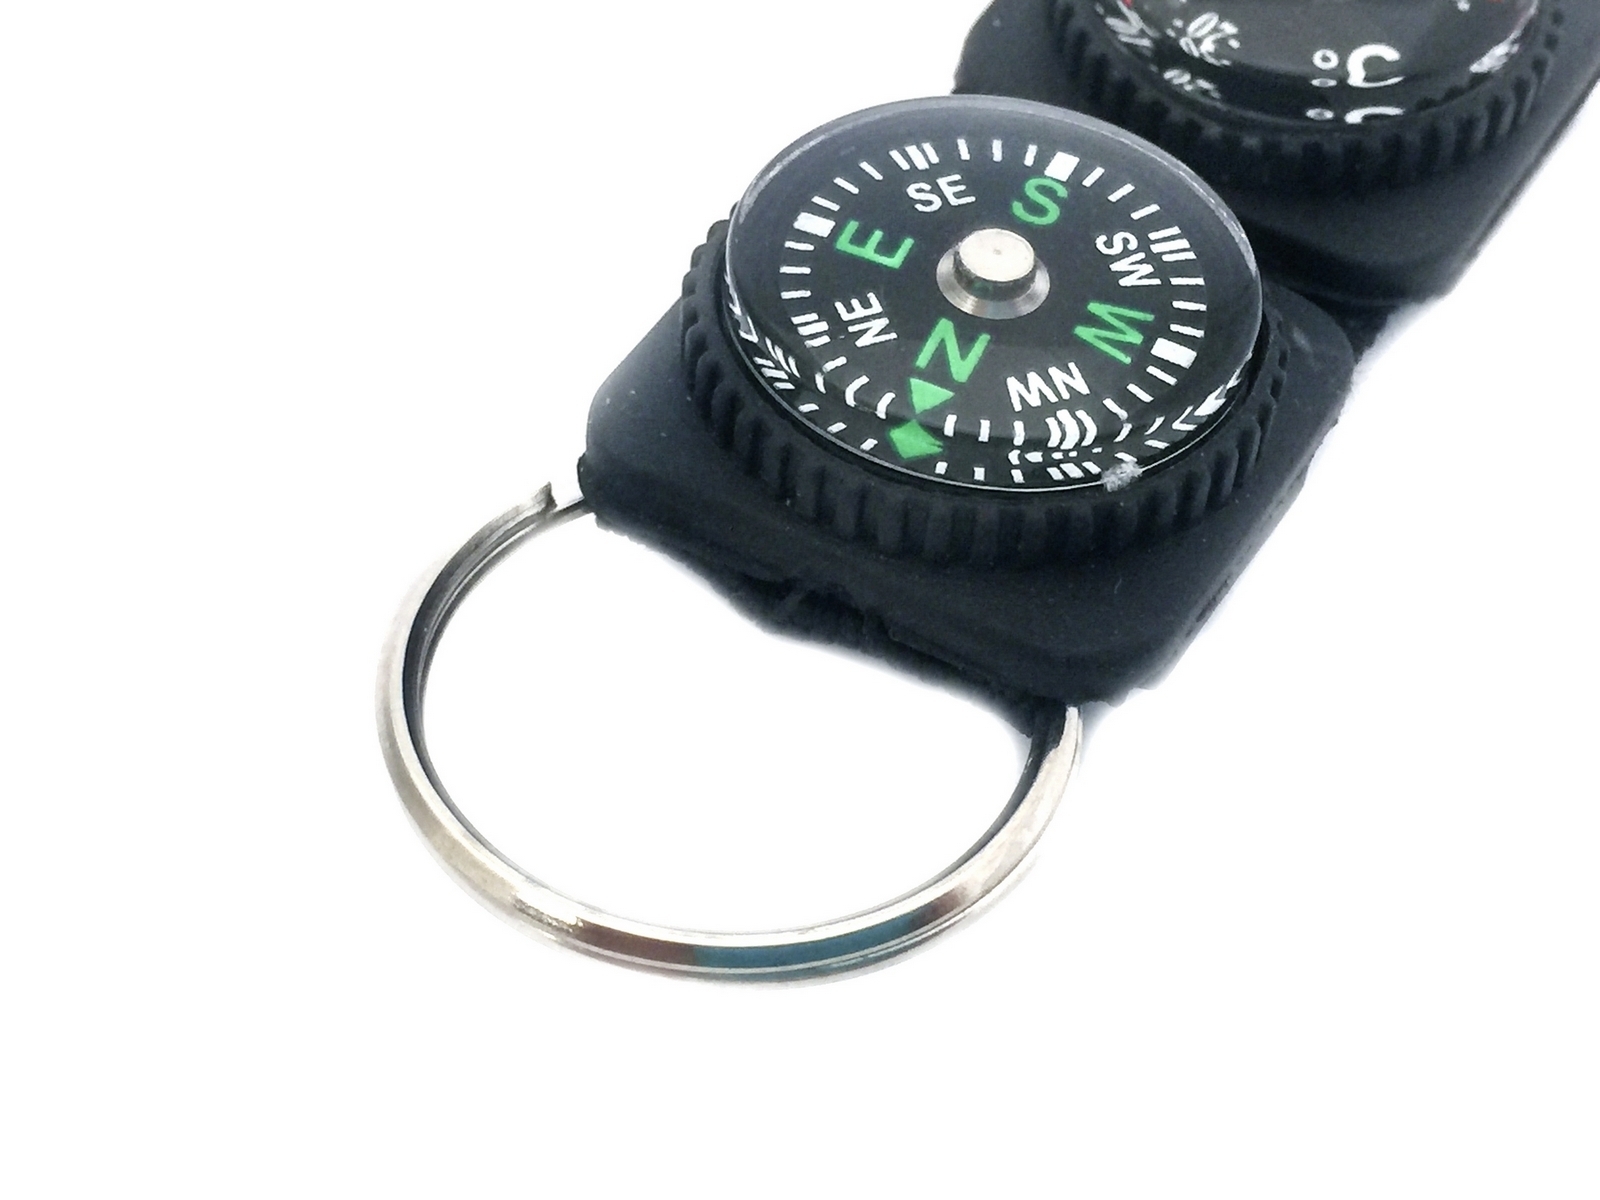 ACATANA Outdoor Compass + Thermometer Strap w/ Keychain & Carabiner Clip